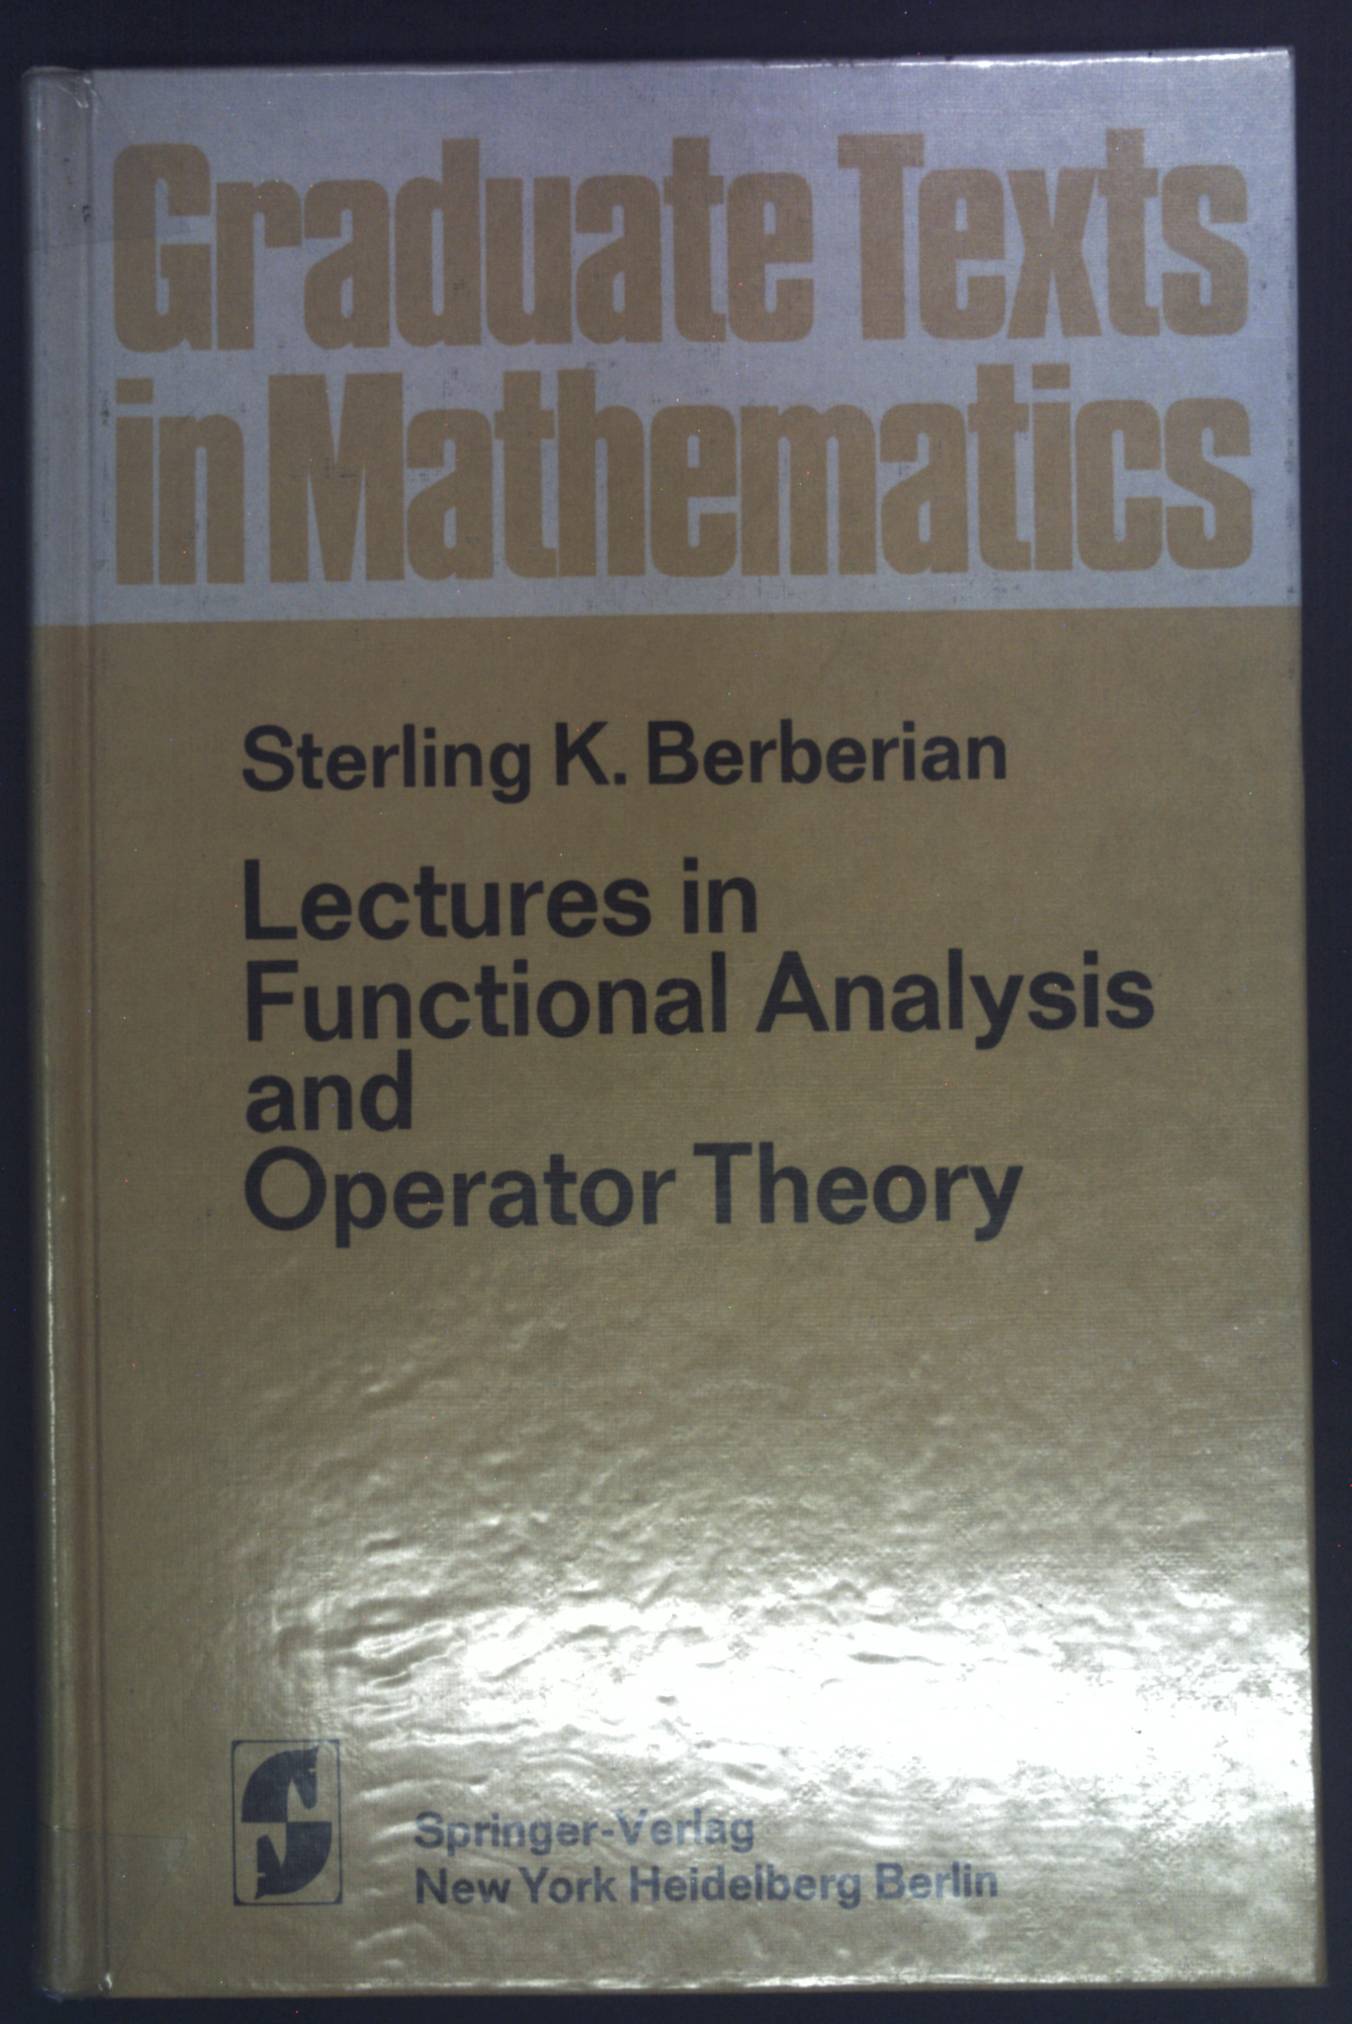 Lectures in Functional Analysis and Operator Theory Graduate Texts in Mathematics 15 - Berberian, Sterling K.